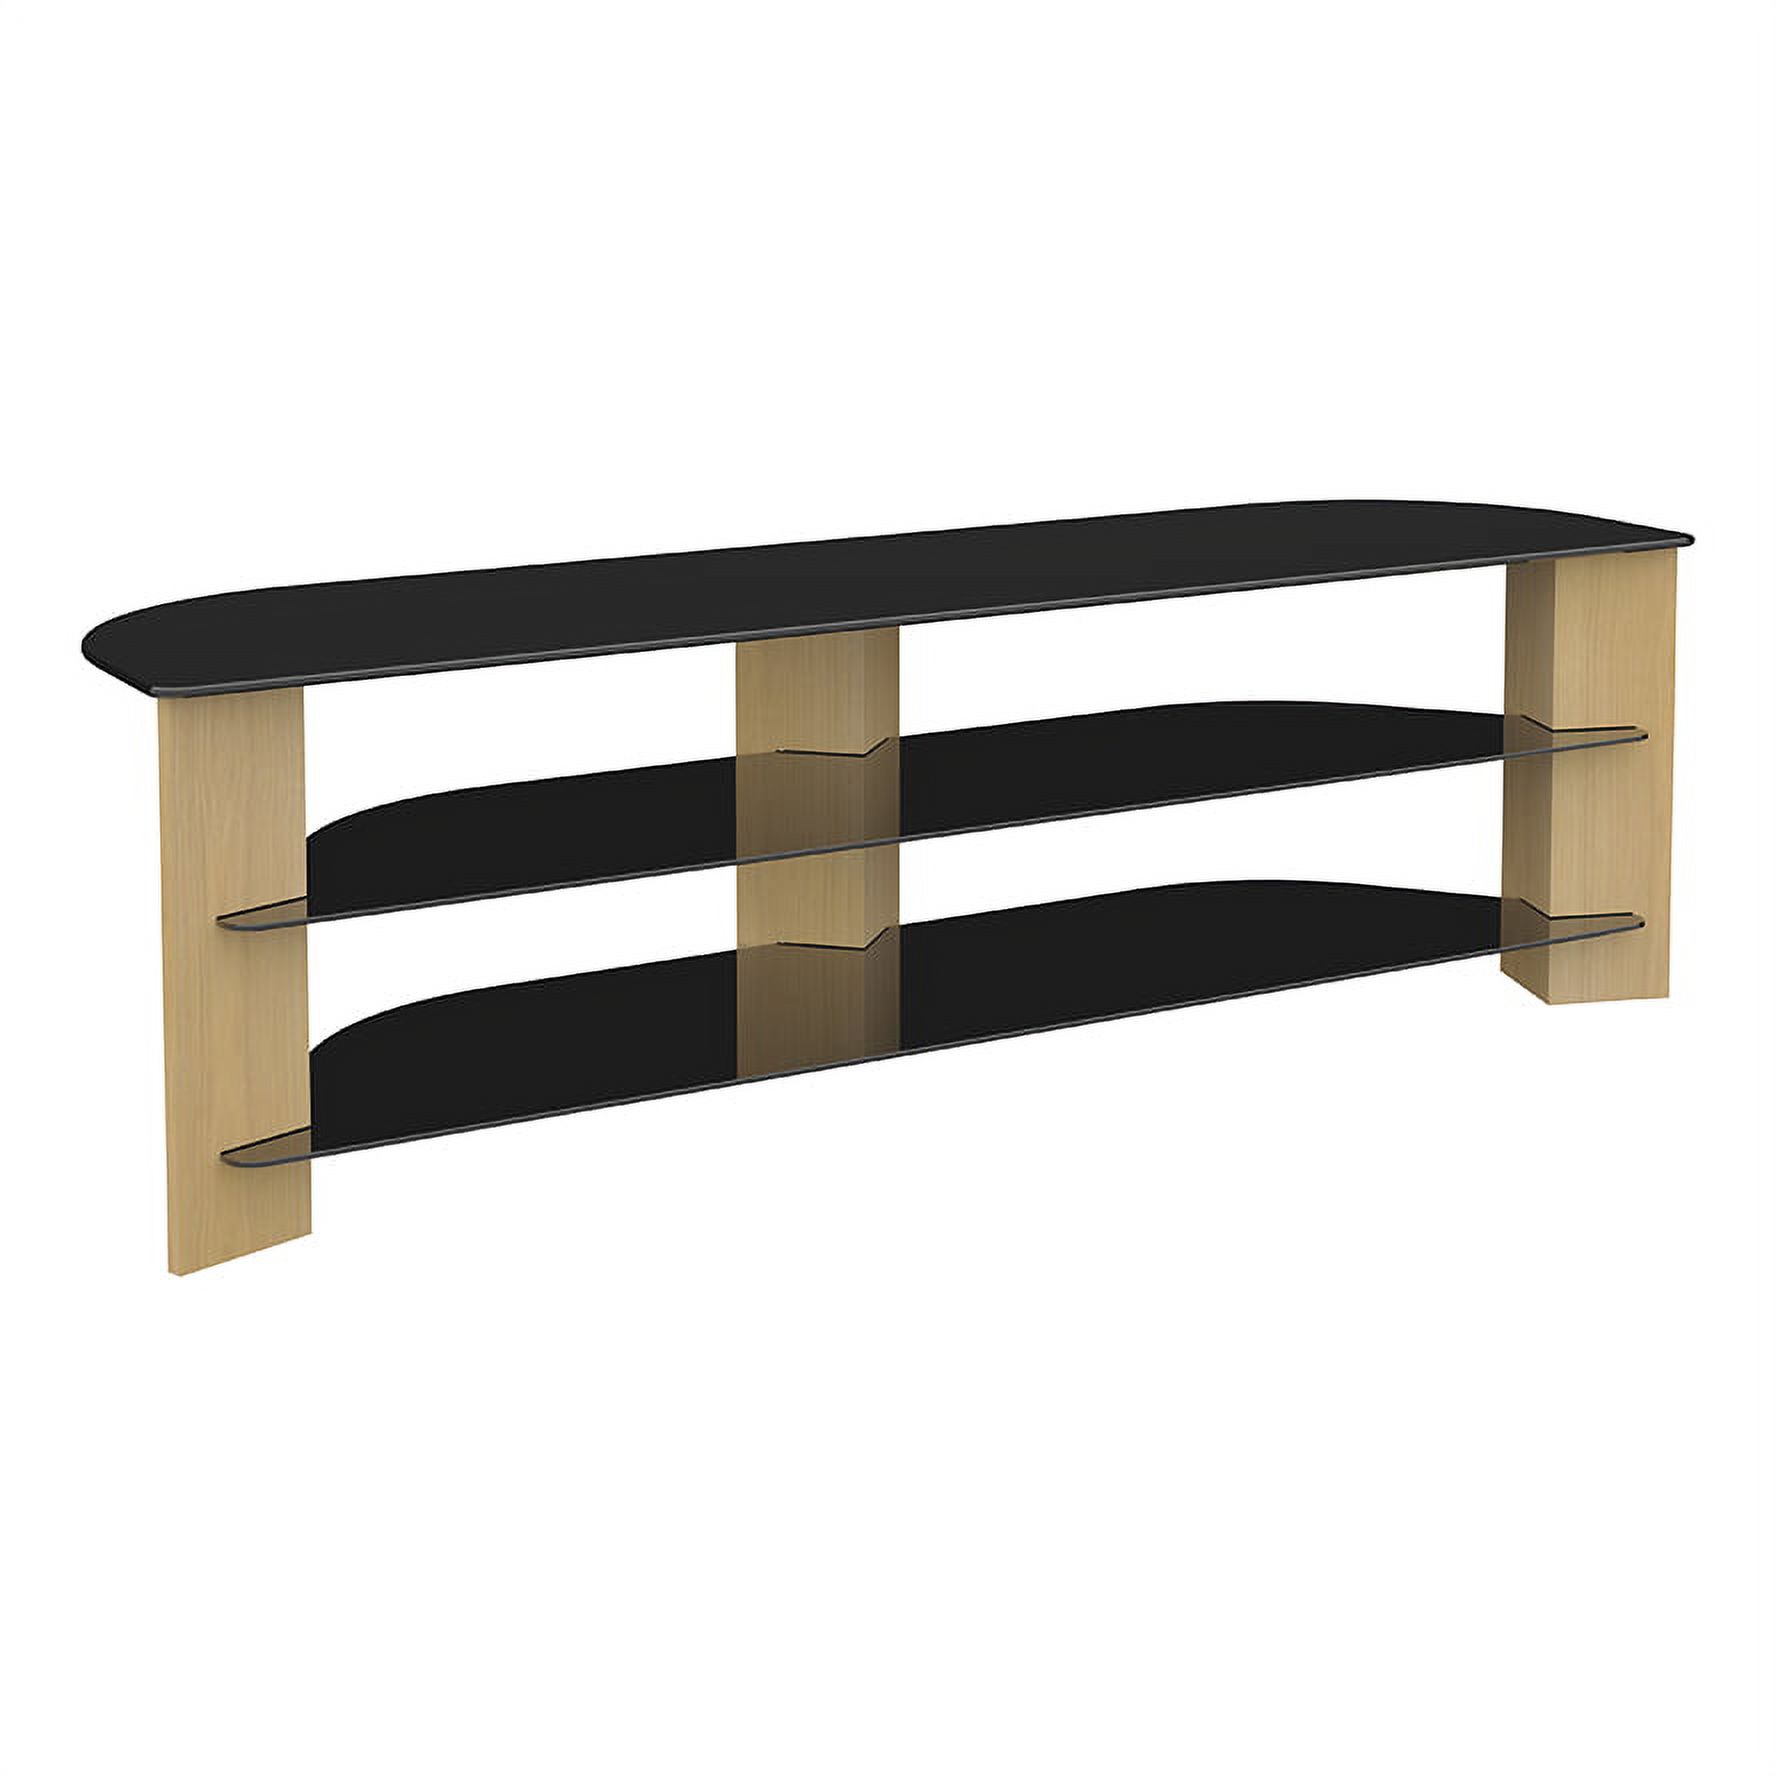 AVF FS1500VAROB-A Varano TV Stand with Light Oak Legs and Black Tempered Glass Shelves for many TVs up to 70 inch. For TVs with wide feet, please measure to assure fit on this stand. - image 1 of 5